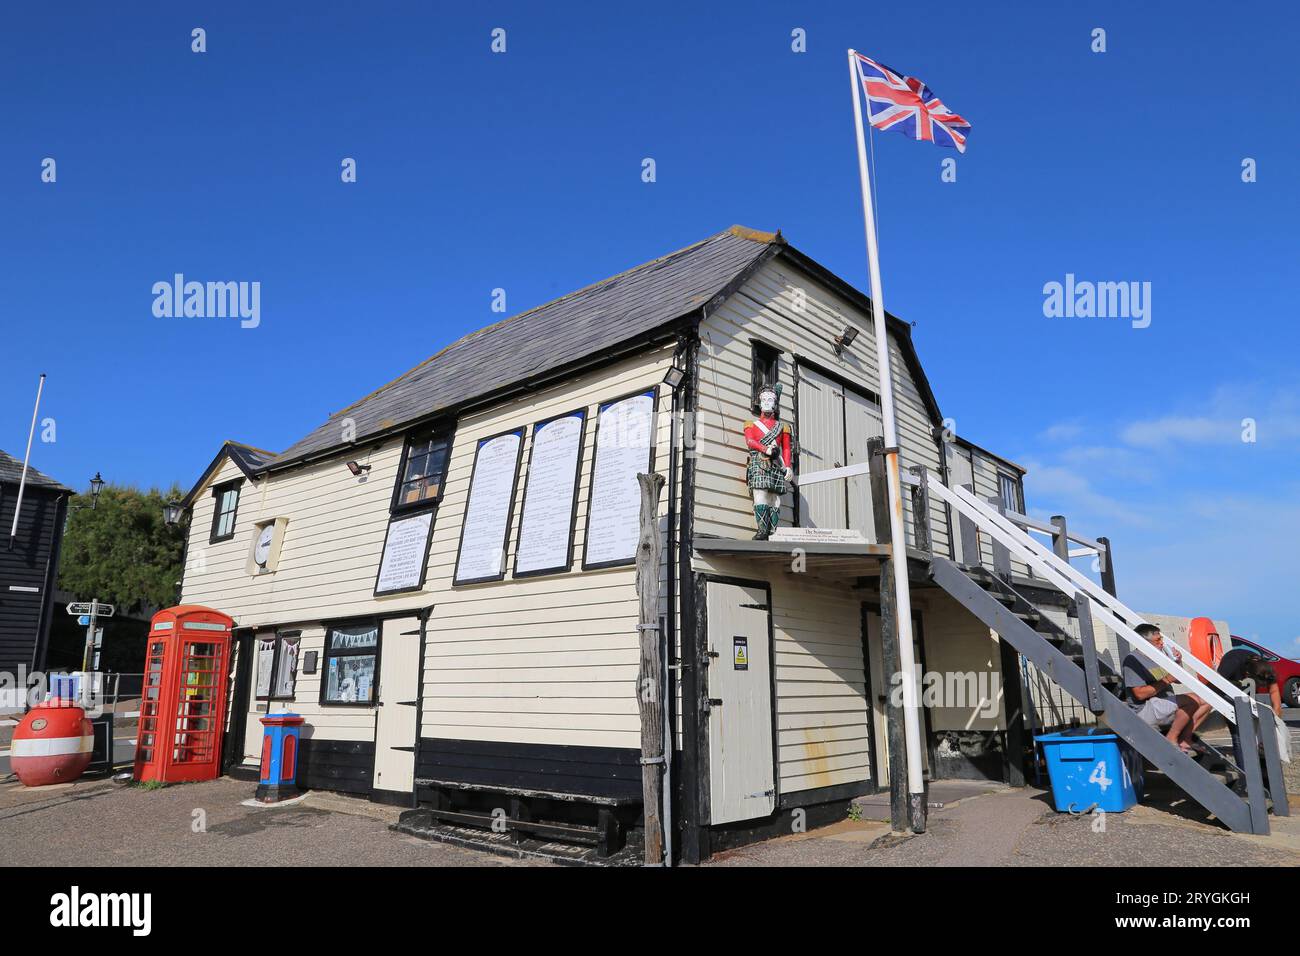 Old Lifeboat Station, The Jetty, Broadstairs, Isle of Thanet, Kent, England, Großbritannien, Großbritannien, Europa Stockfoto